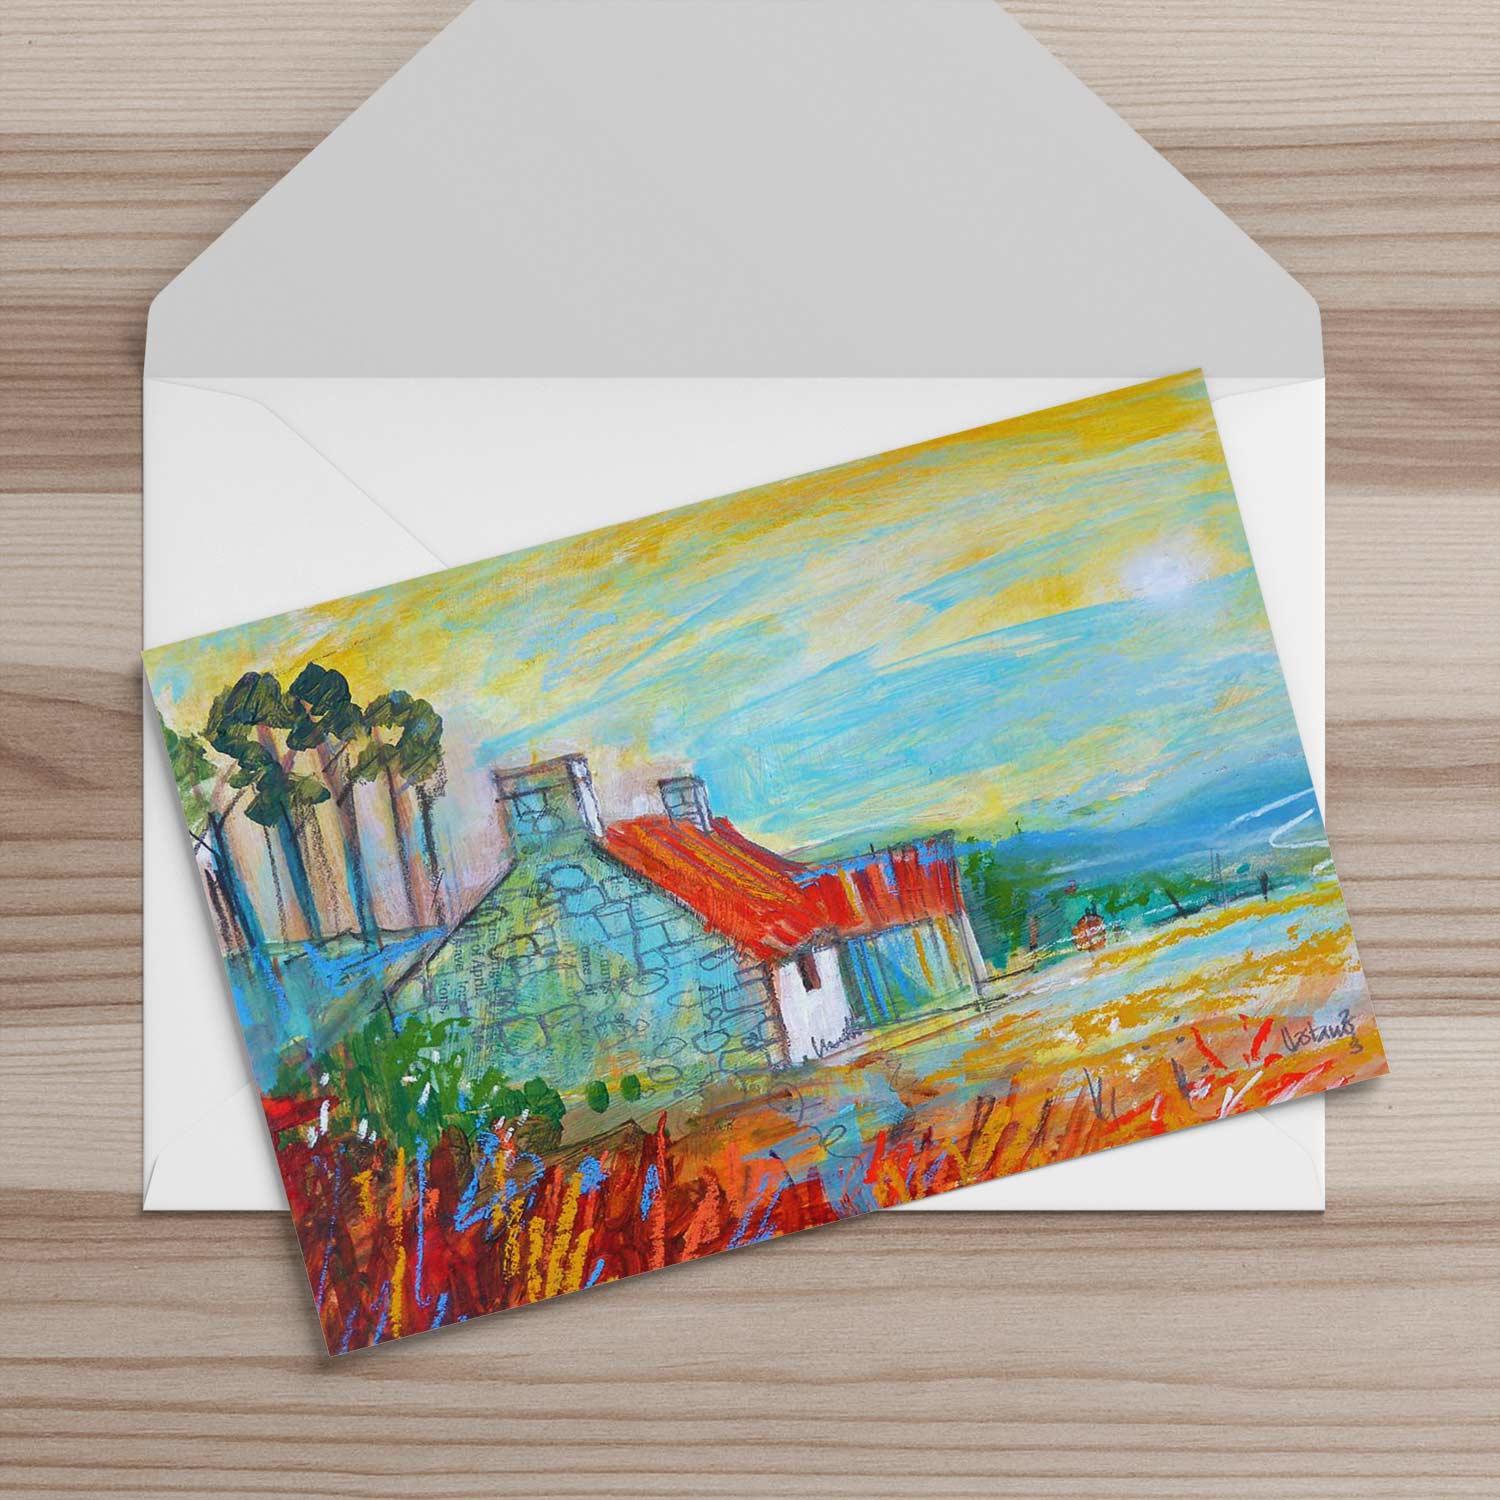 Hill View Greeting Card from an original painting by artist Ann Vastano